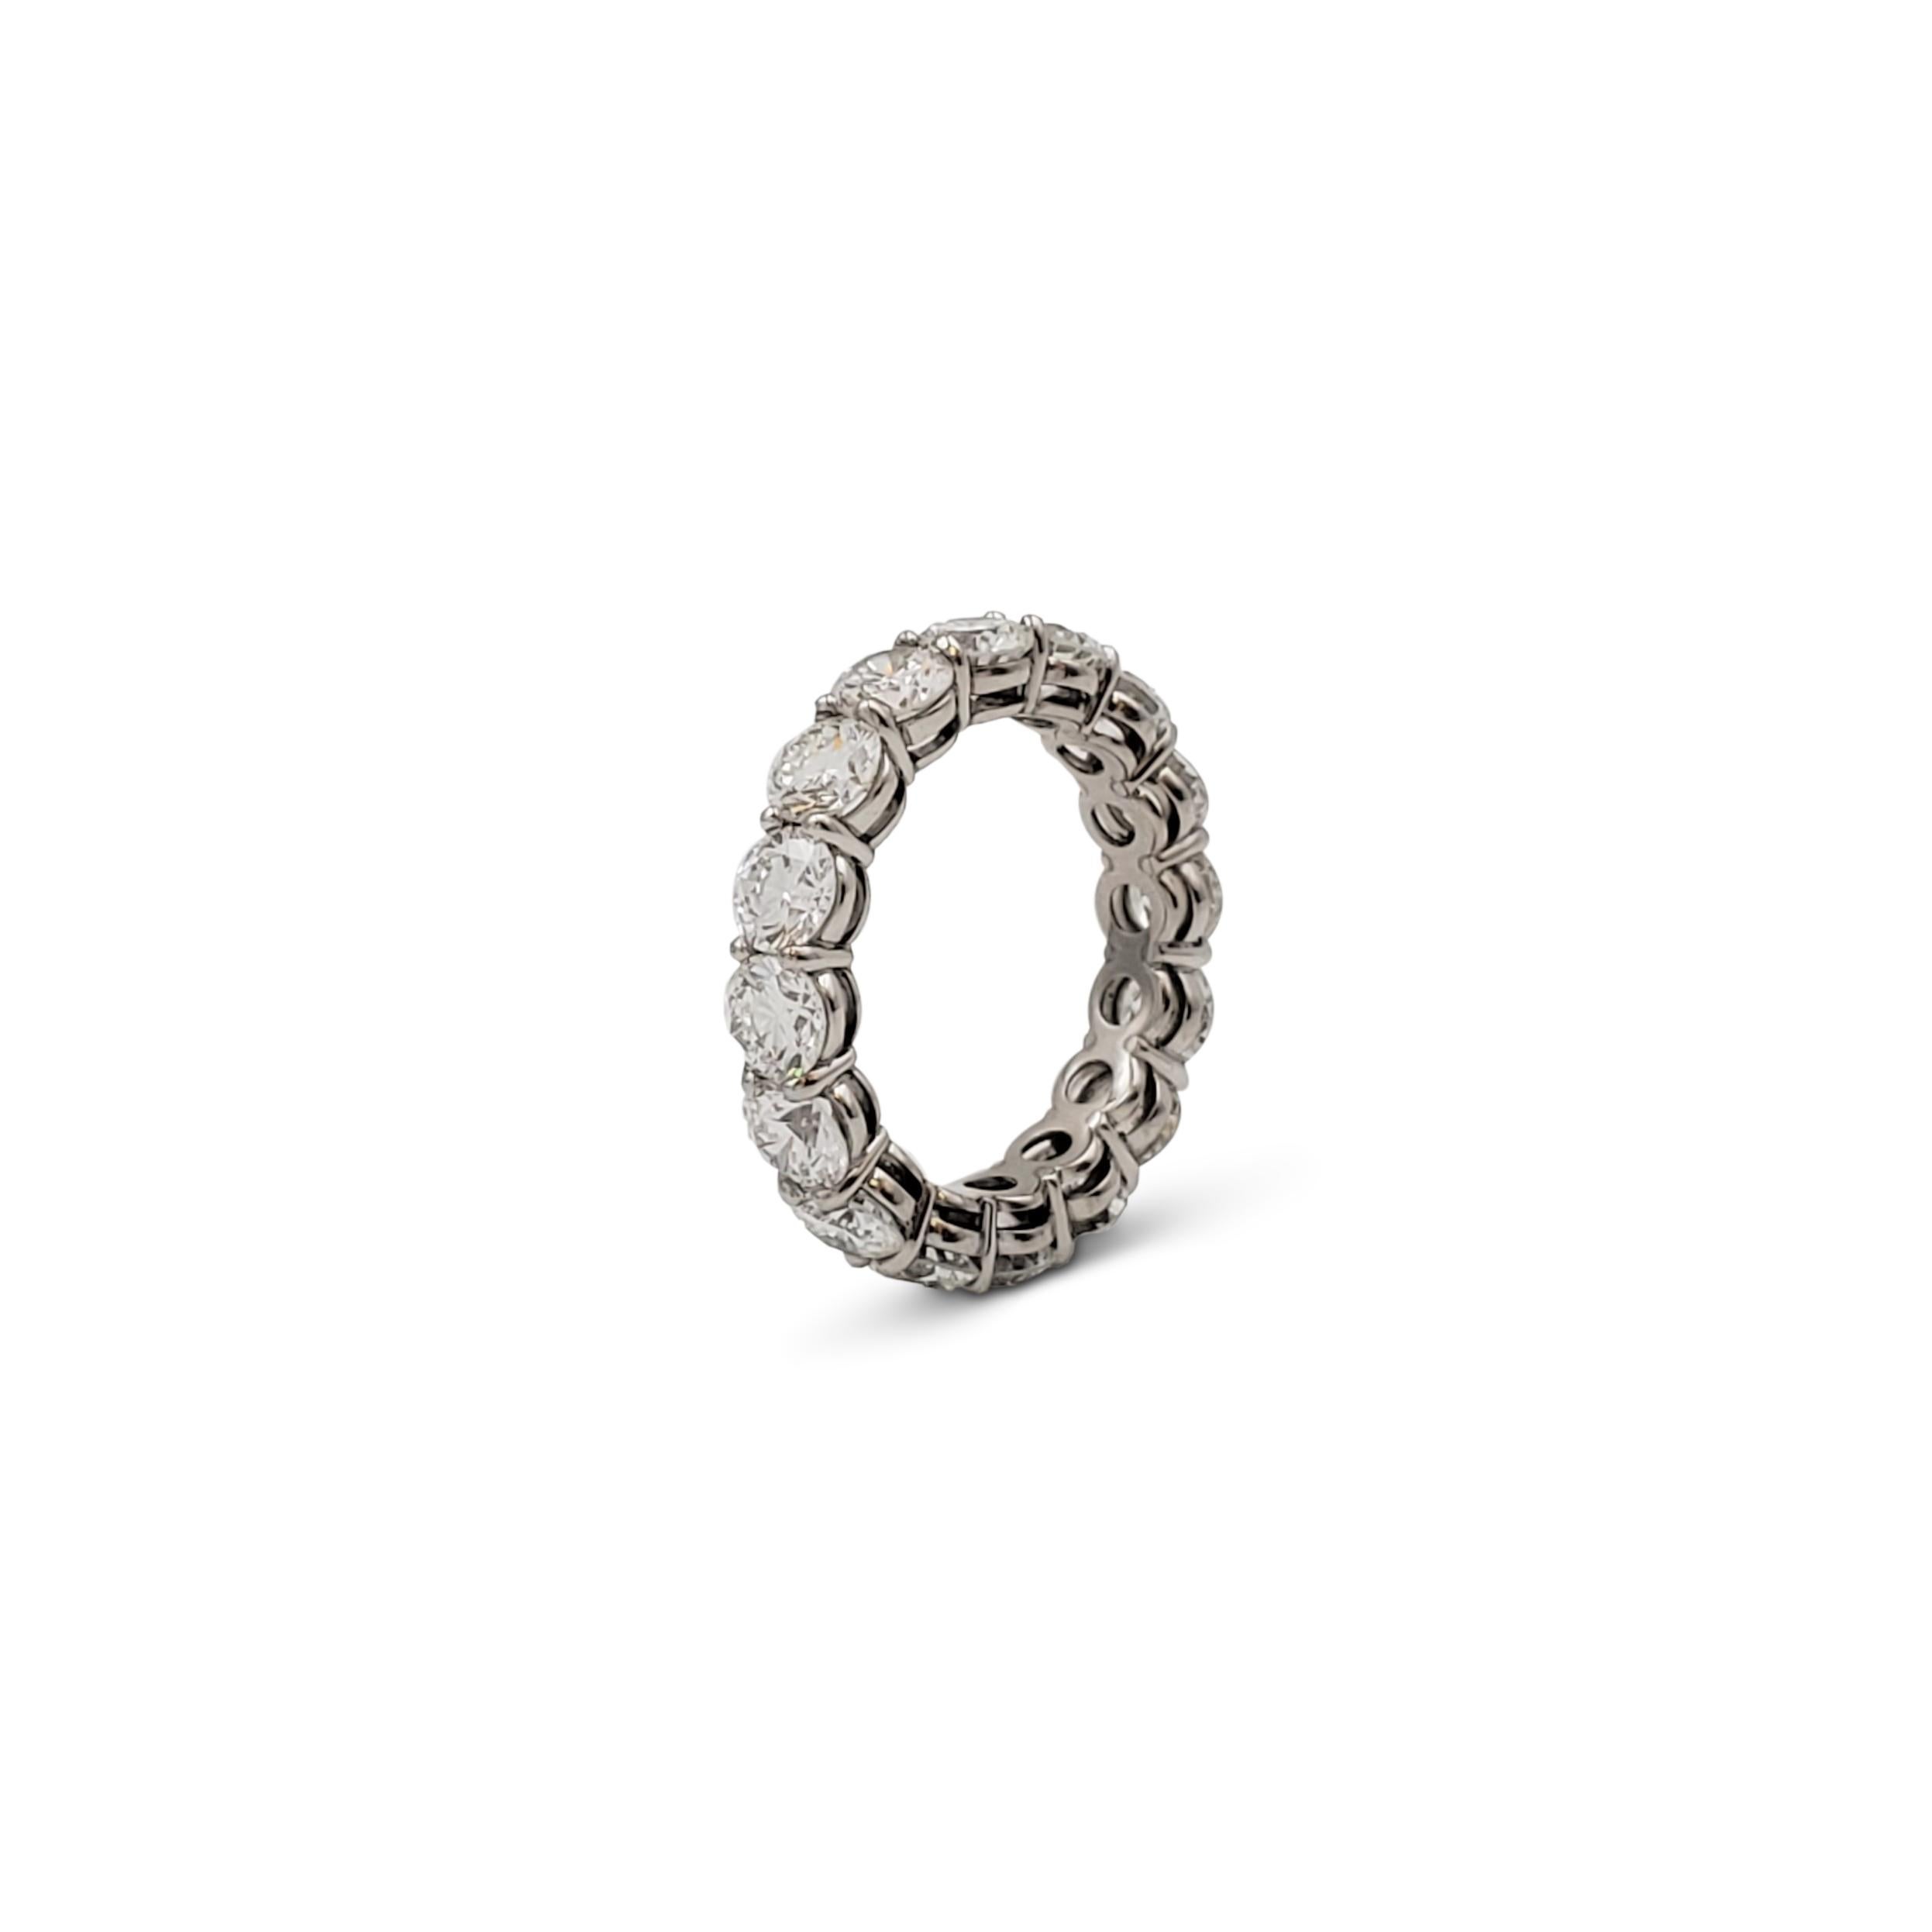 A classic eternity band crafted in platinum set with an estimated 3.50 carats of round brilliant cut diamonds (F-G, VS). Ring size US 4. Marked PT 950. The ring is not presented with the original box or papers. CIRCA 2010s.

Ring Size: US 4
Box: